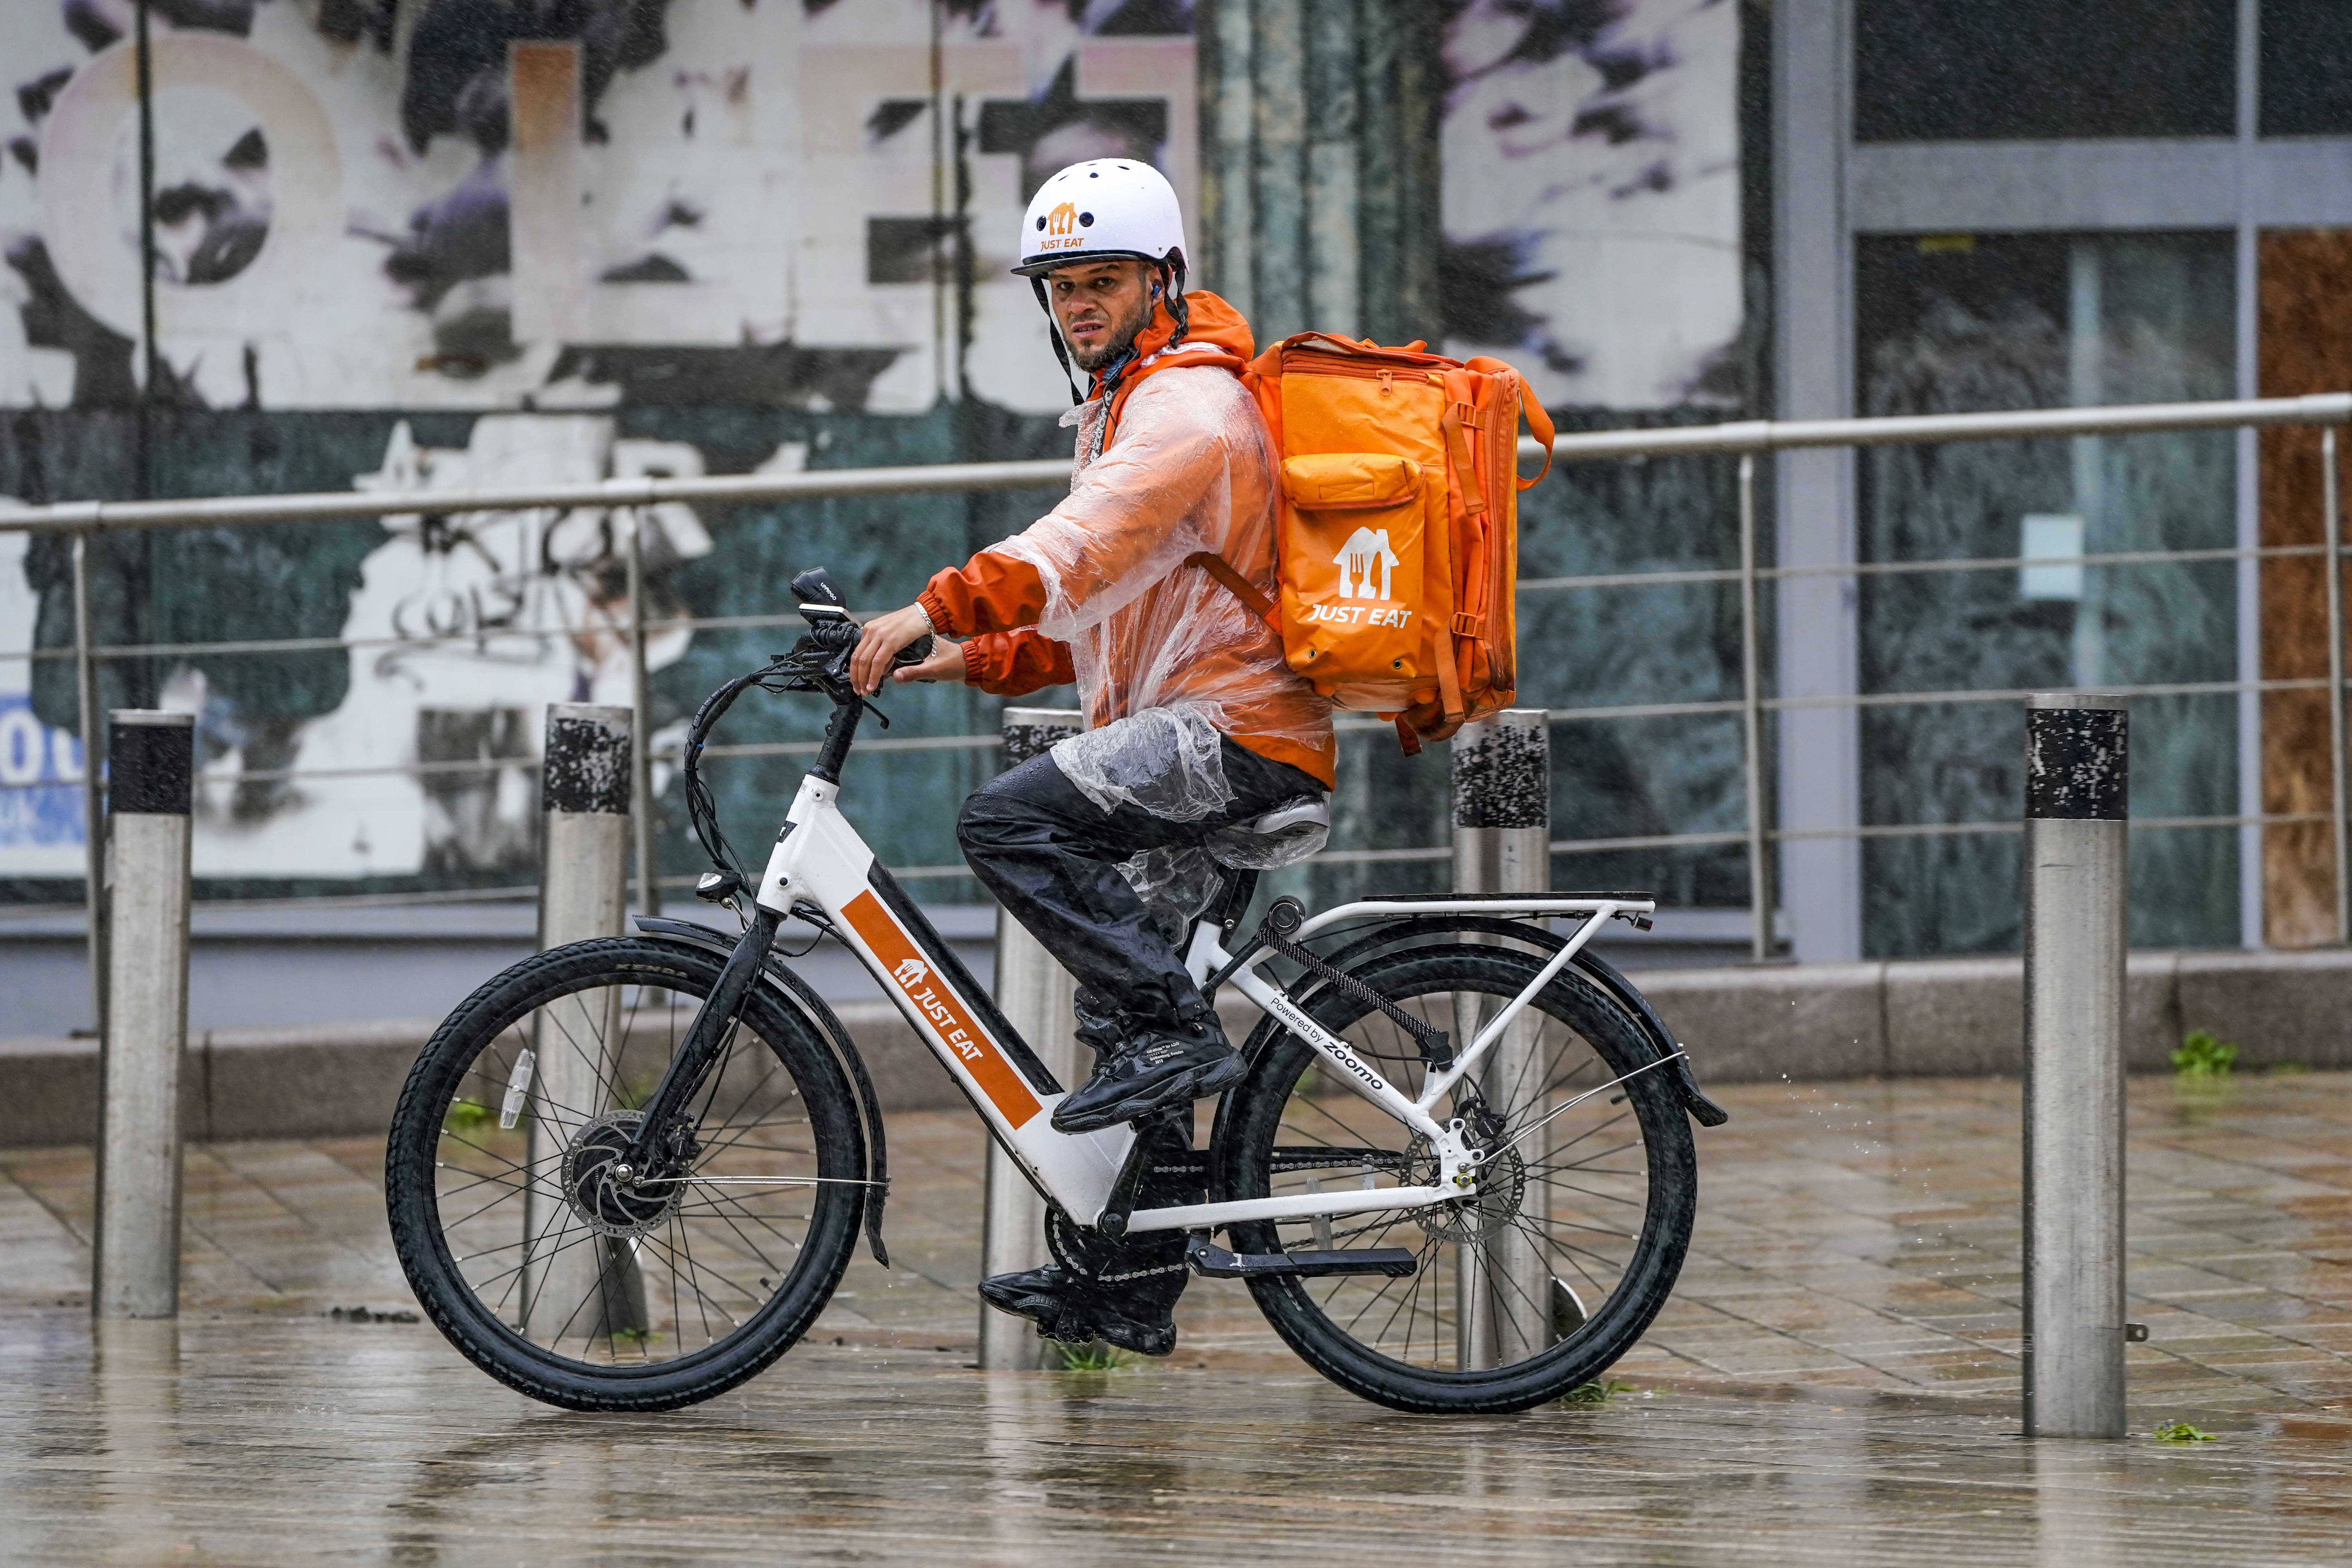 How To Deliver Uber Eats On Bike? (2022 Guide)